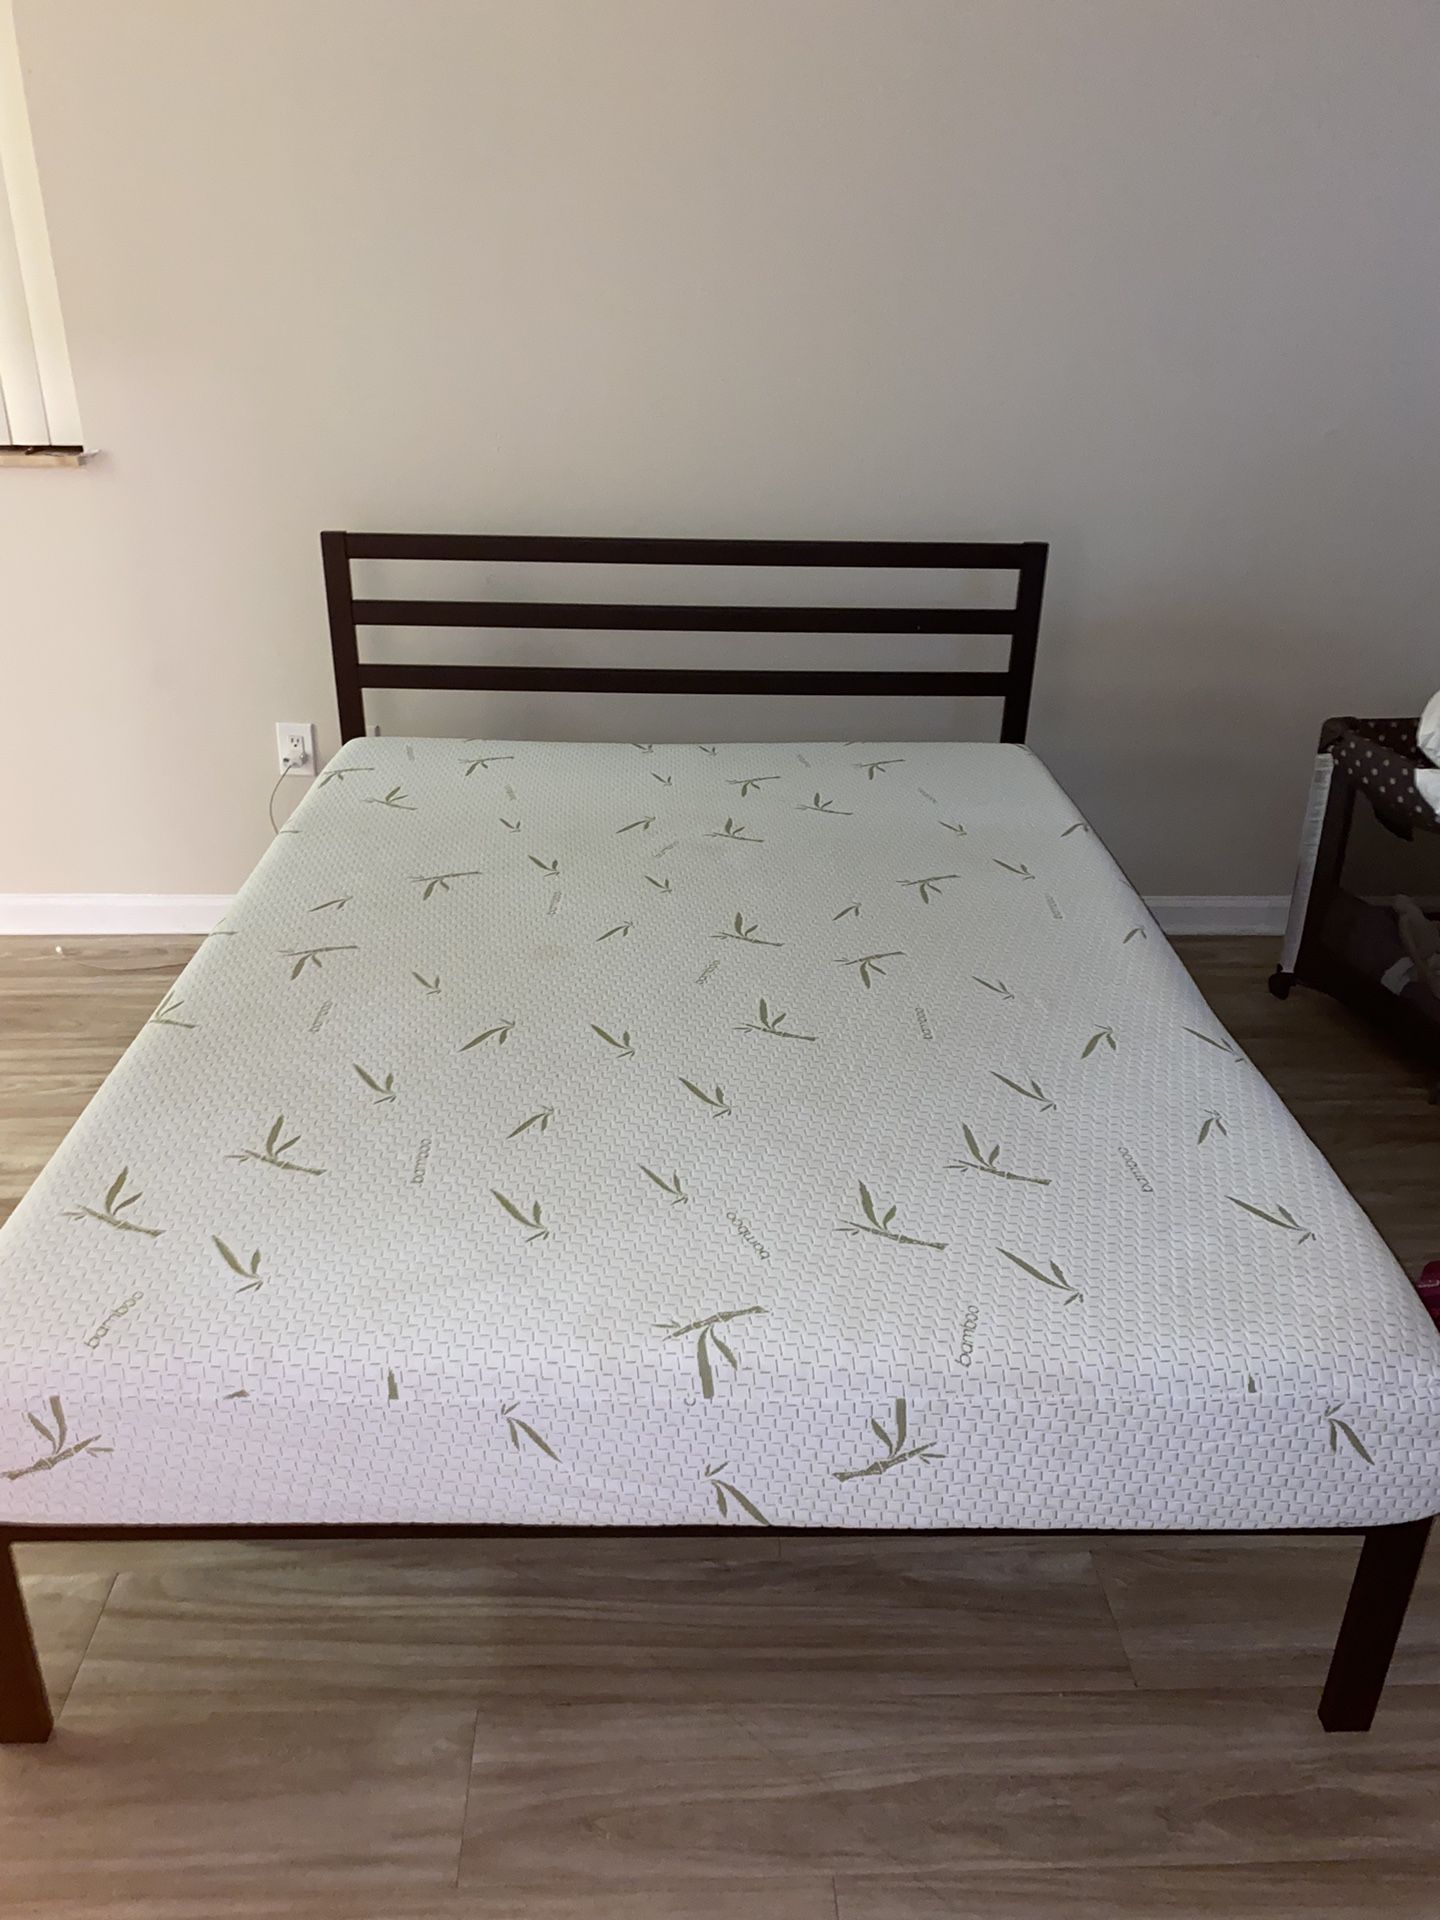 Mattress And Bed Frame $200